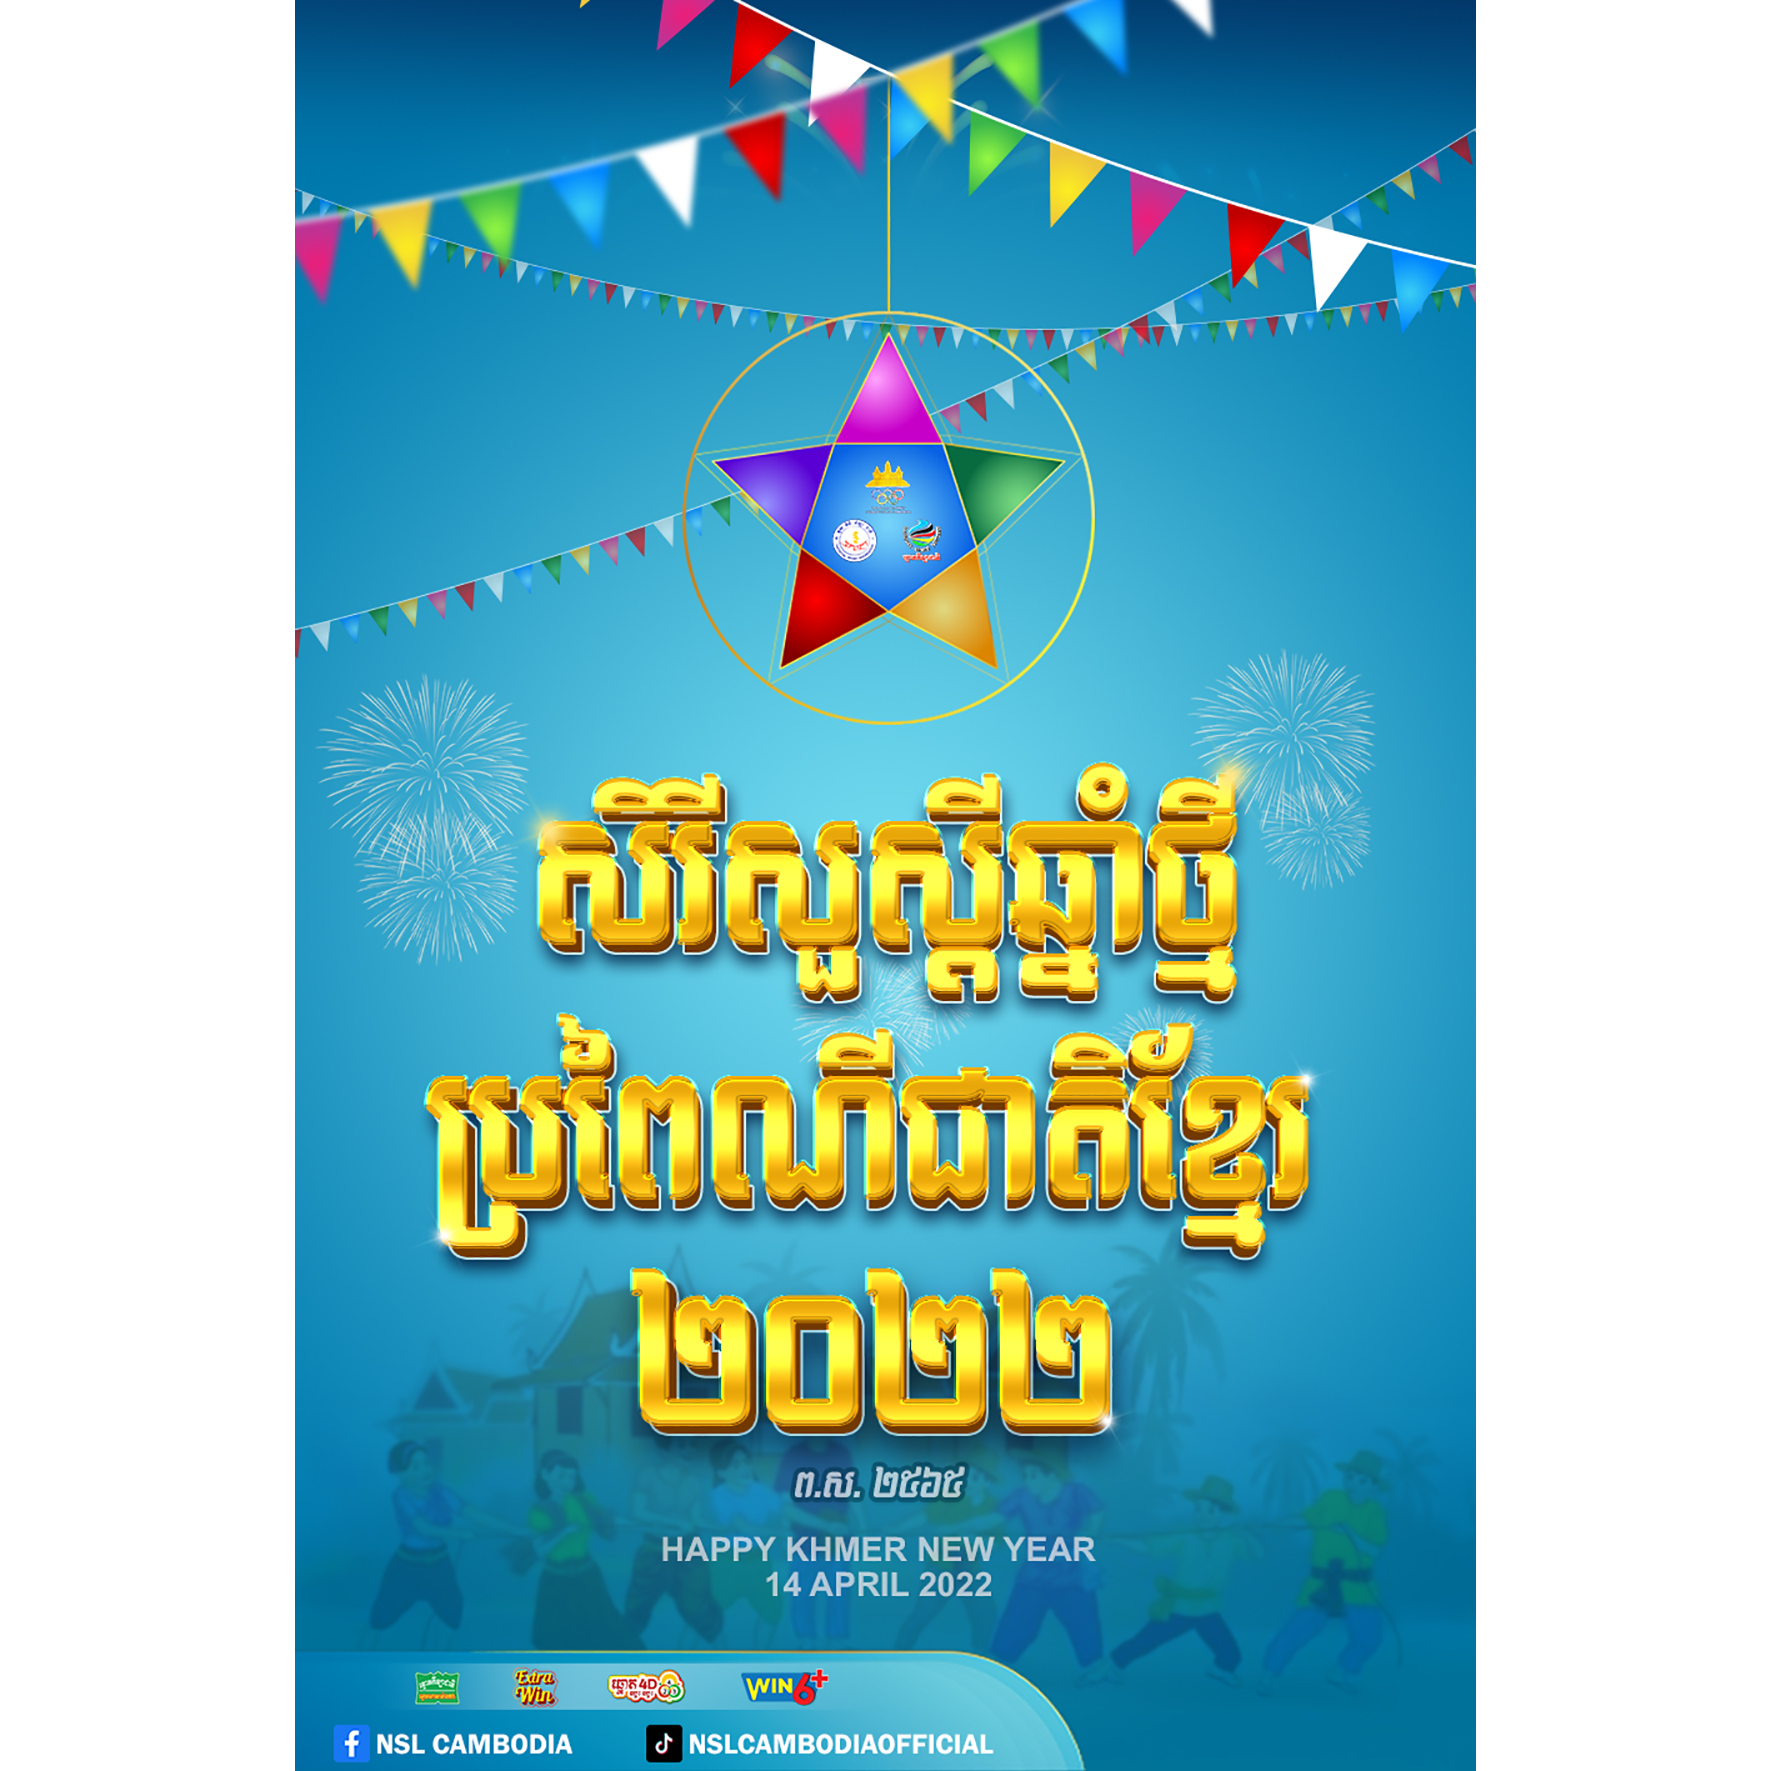 Khmer New Year Poster free psd file vectorkh